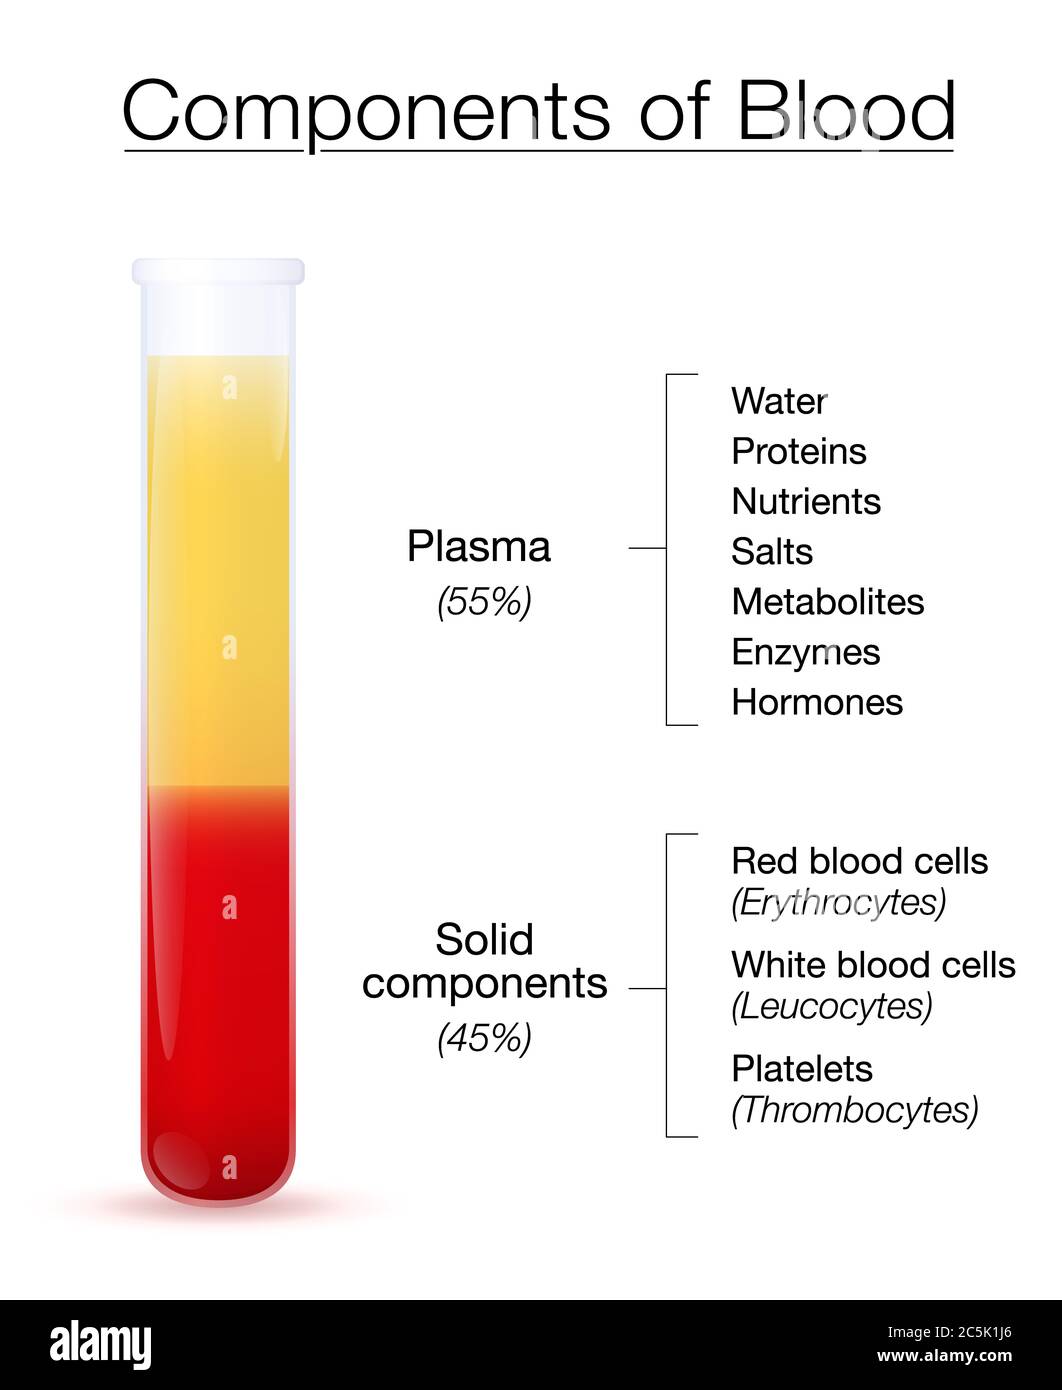 Components of blood infographic. Test tube with centrifuged plasma and solid components - the red and white blood cells and platelets. Stock Photo